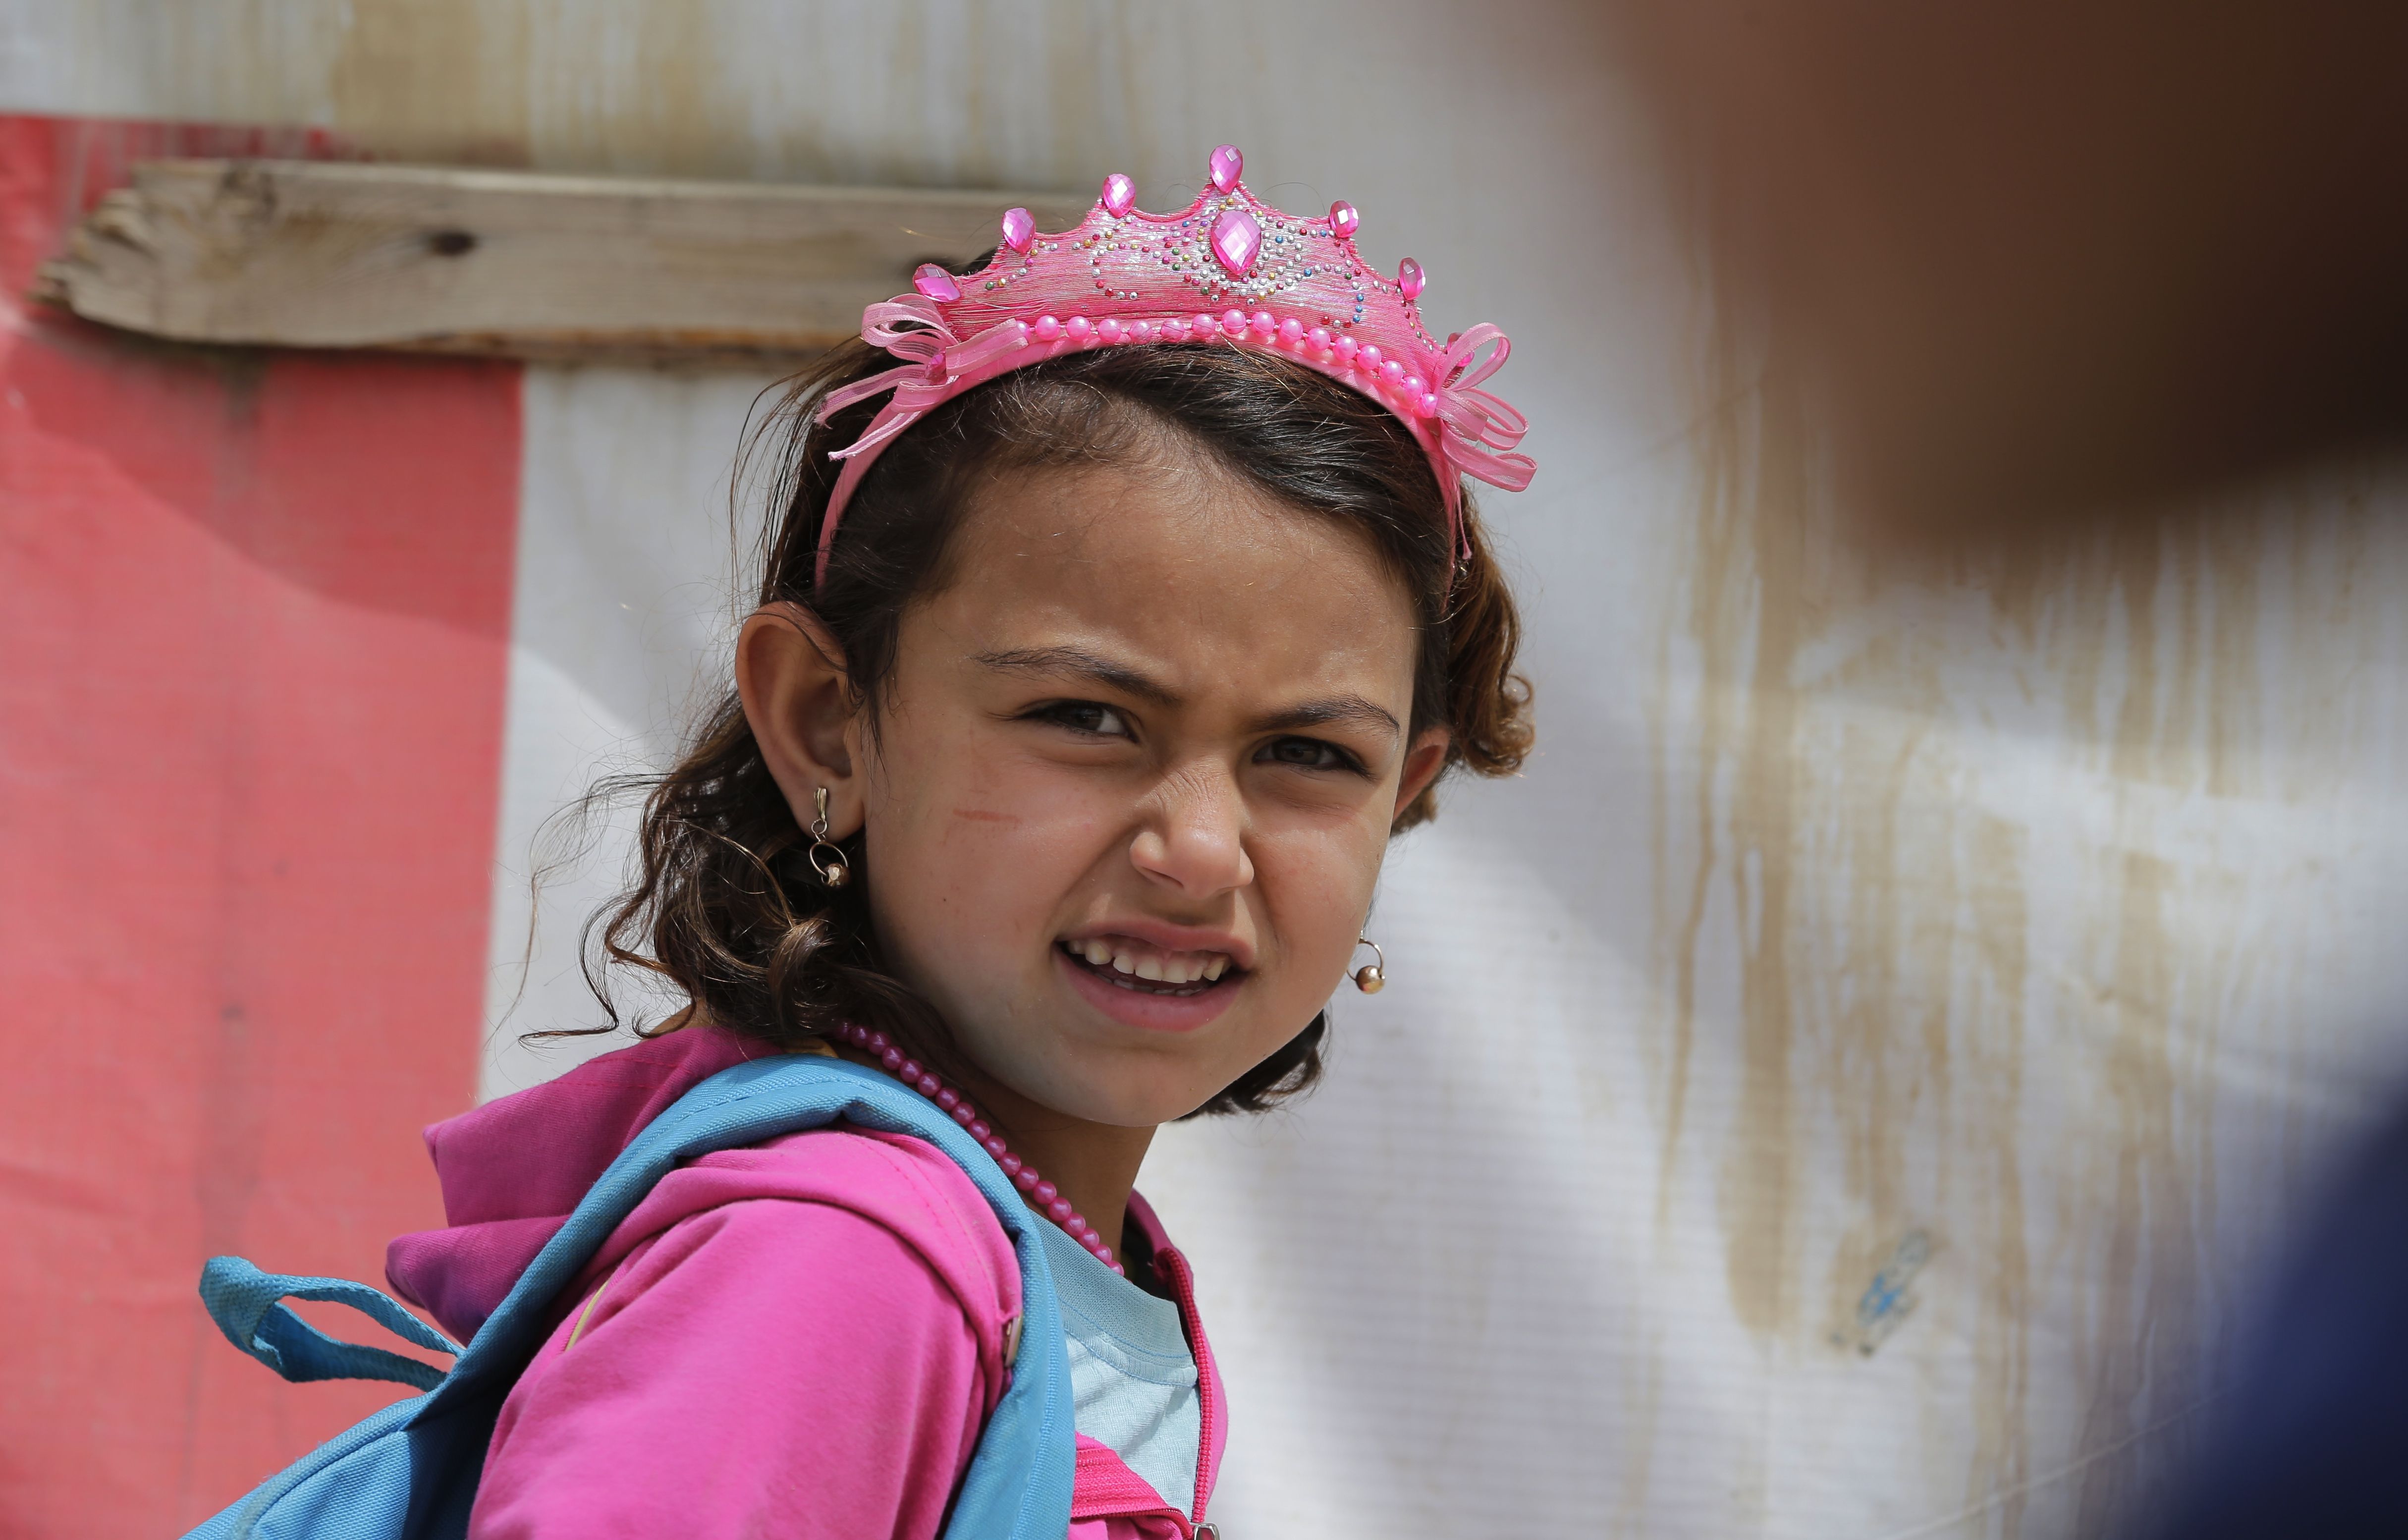 A Syrian refugee heads to school at a camp in the town of Bar Elias, Lebanon, on May 13. | AFP-JIJI